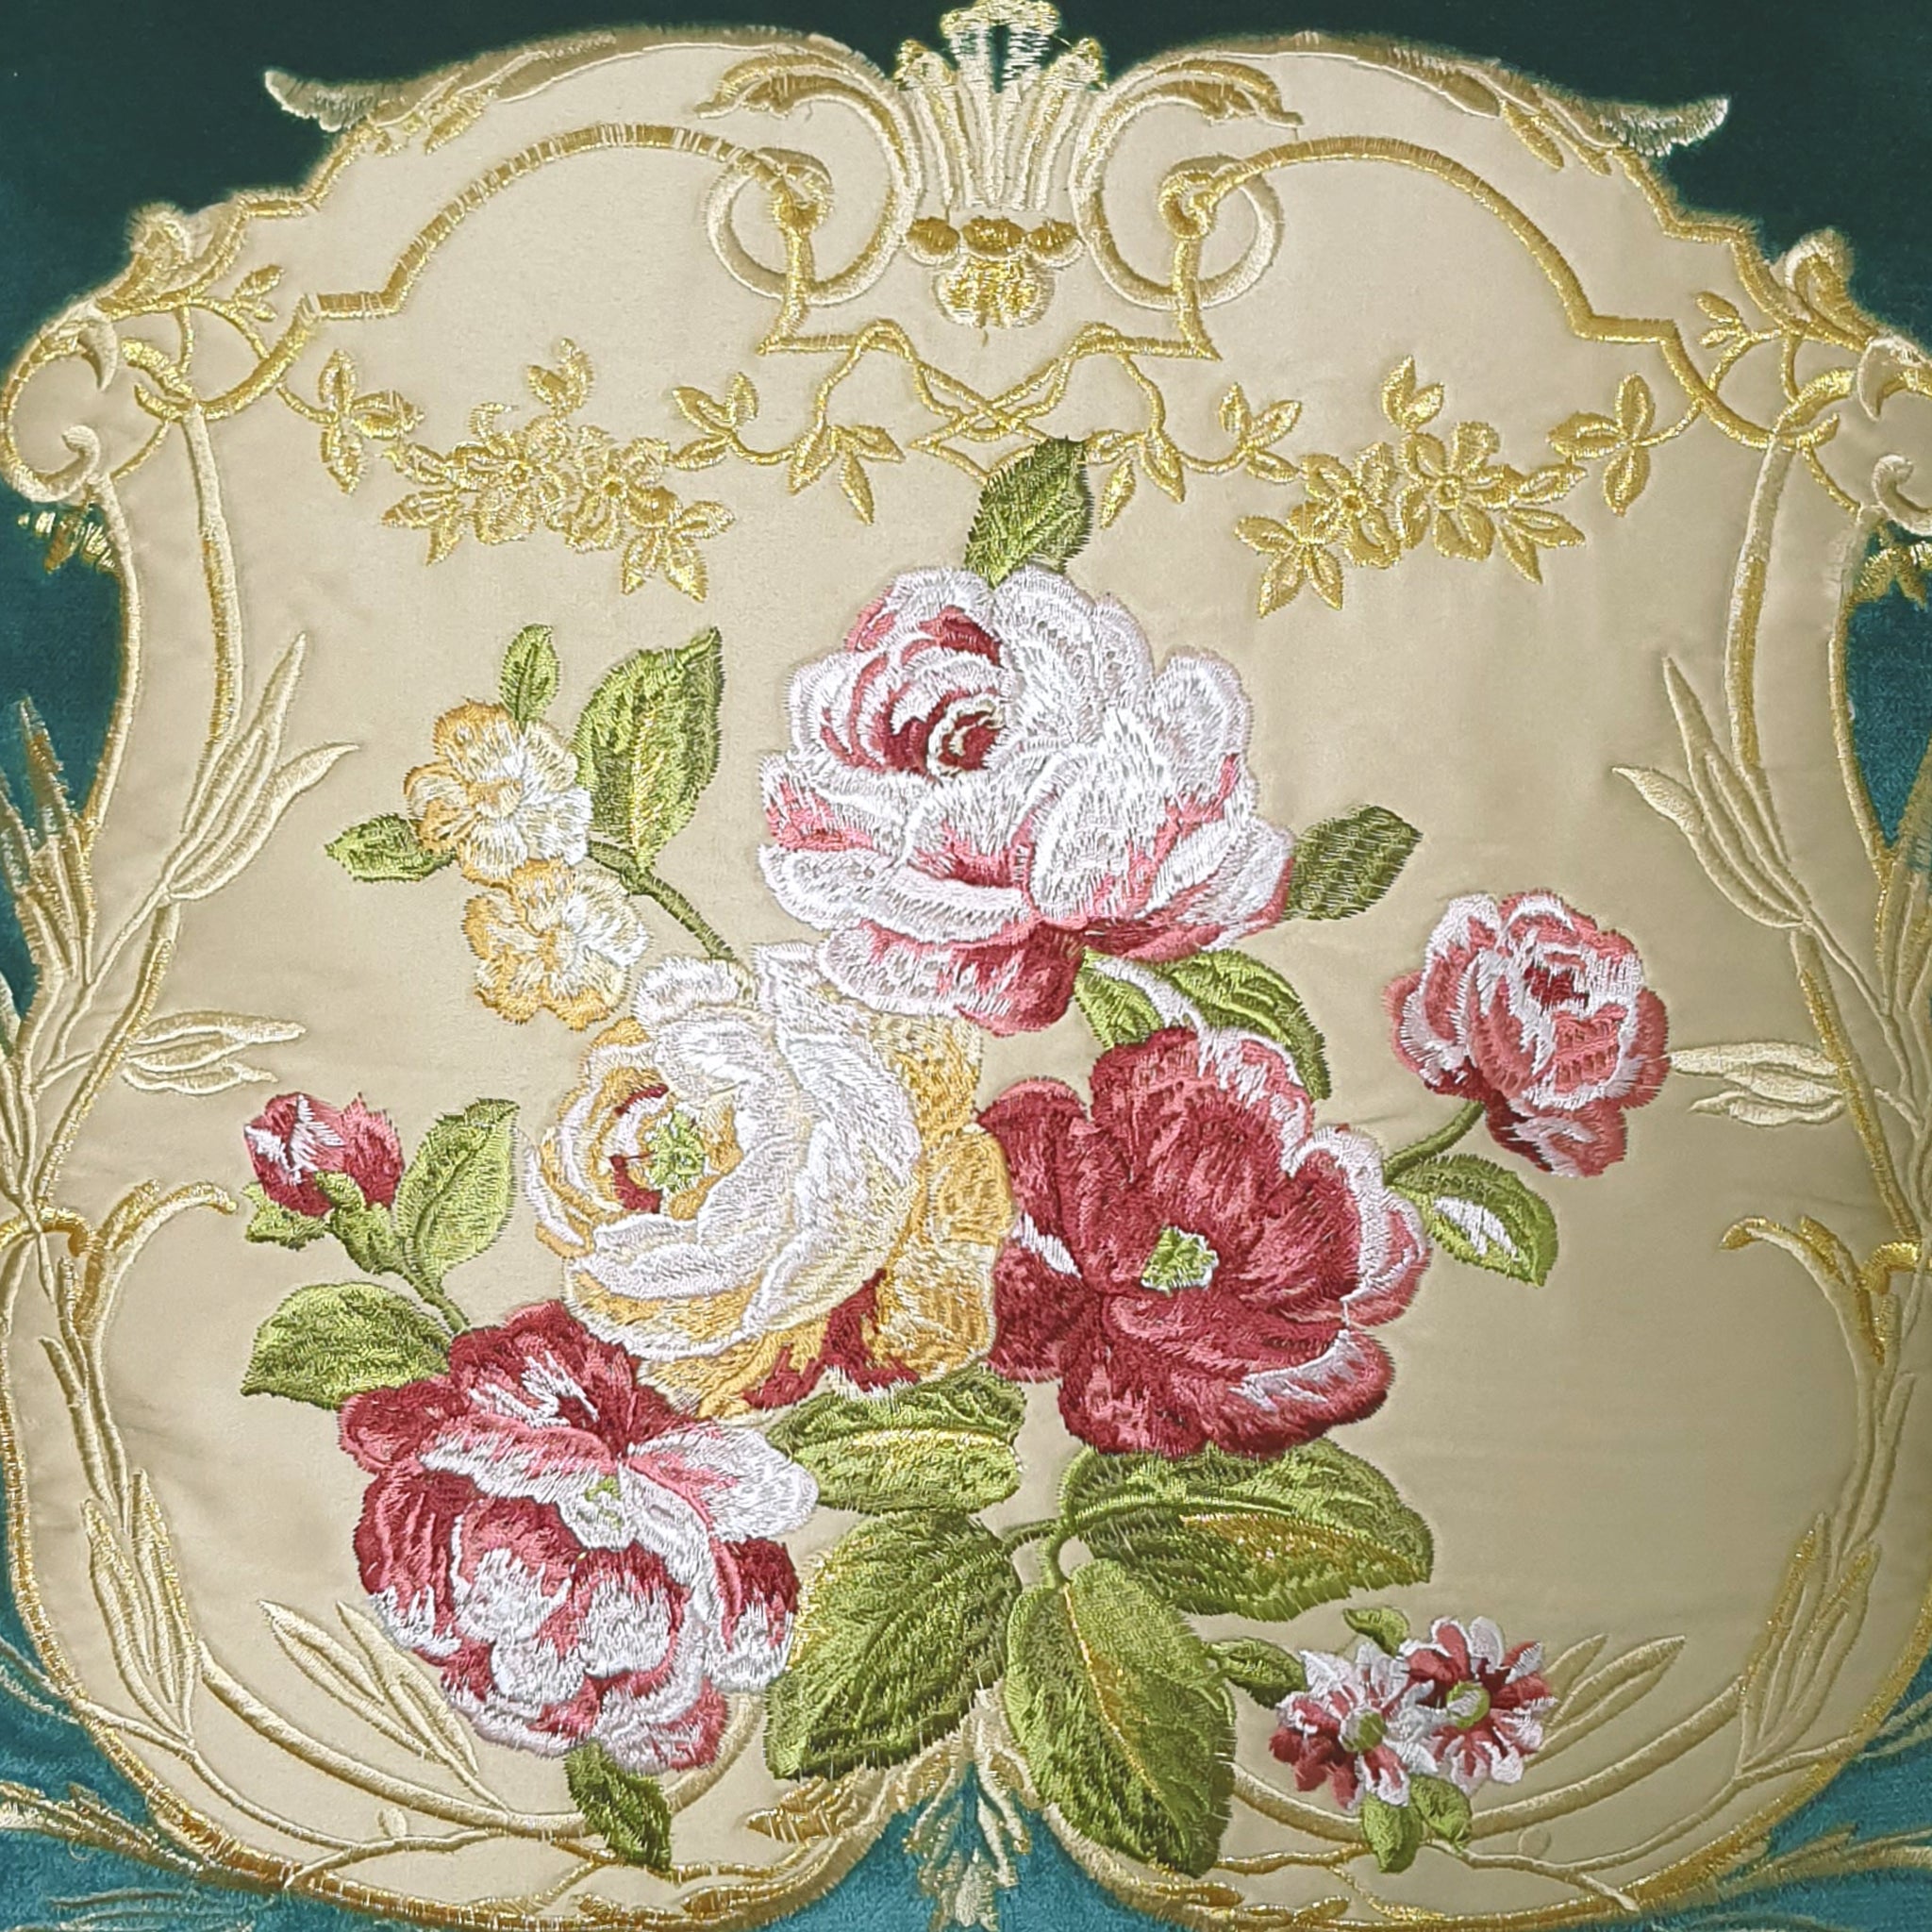 Velvet Cushion Cover Aubusson Rose Decorative Pillowcase Floral Bouquet Embroidery  Throw Pillow for Sofa Chair Red 45x45 cm 18x18 Inches